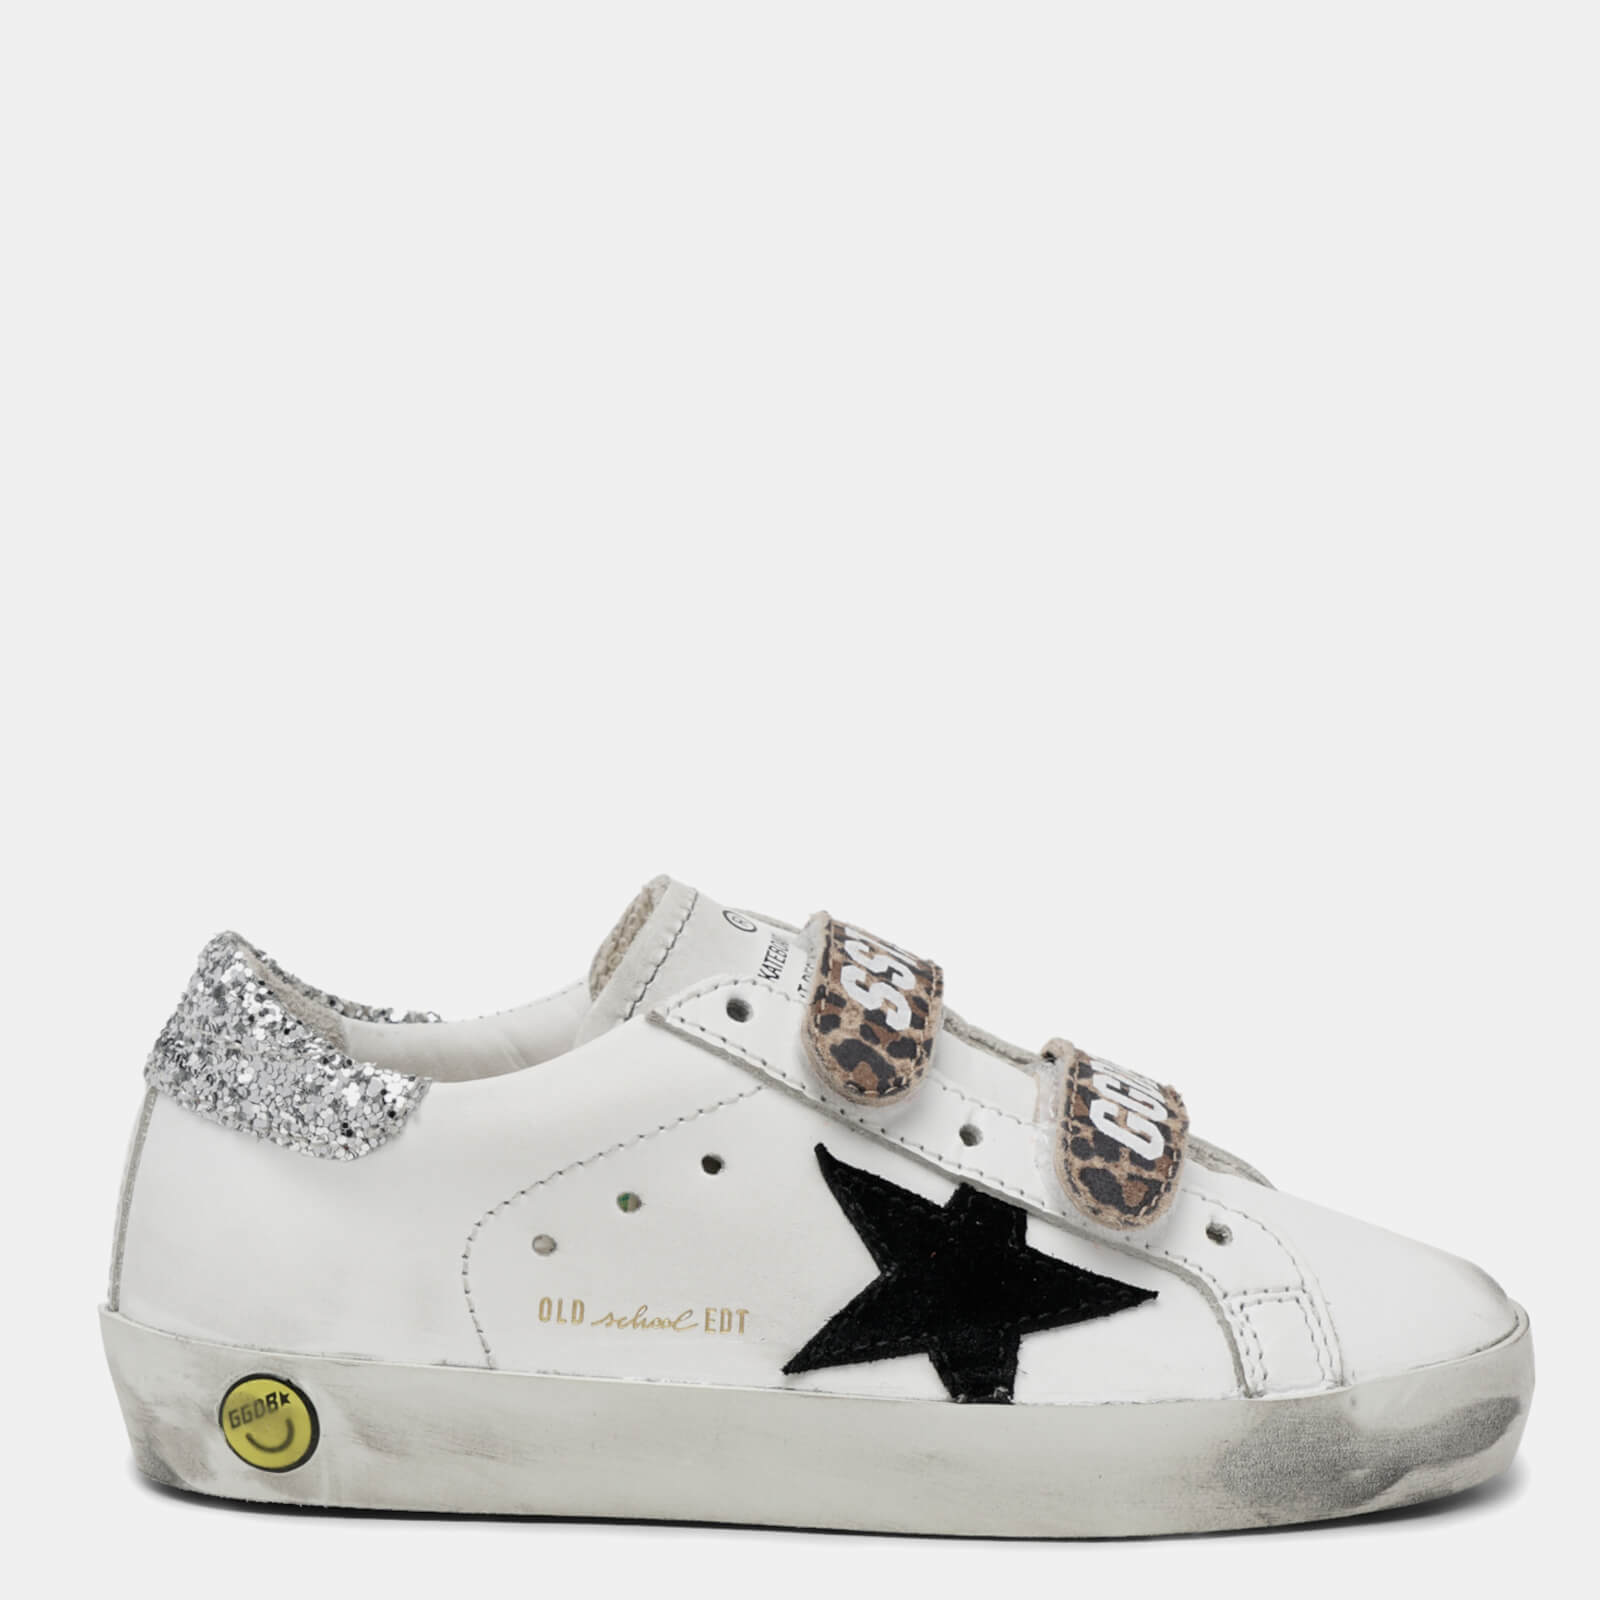 Golden Goose Toddlers' Old School Trainers - White/Black/Leopard - UK 6 Toddler